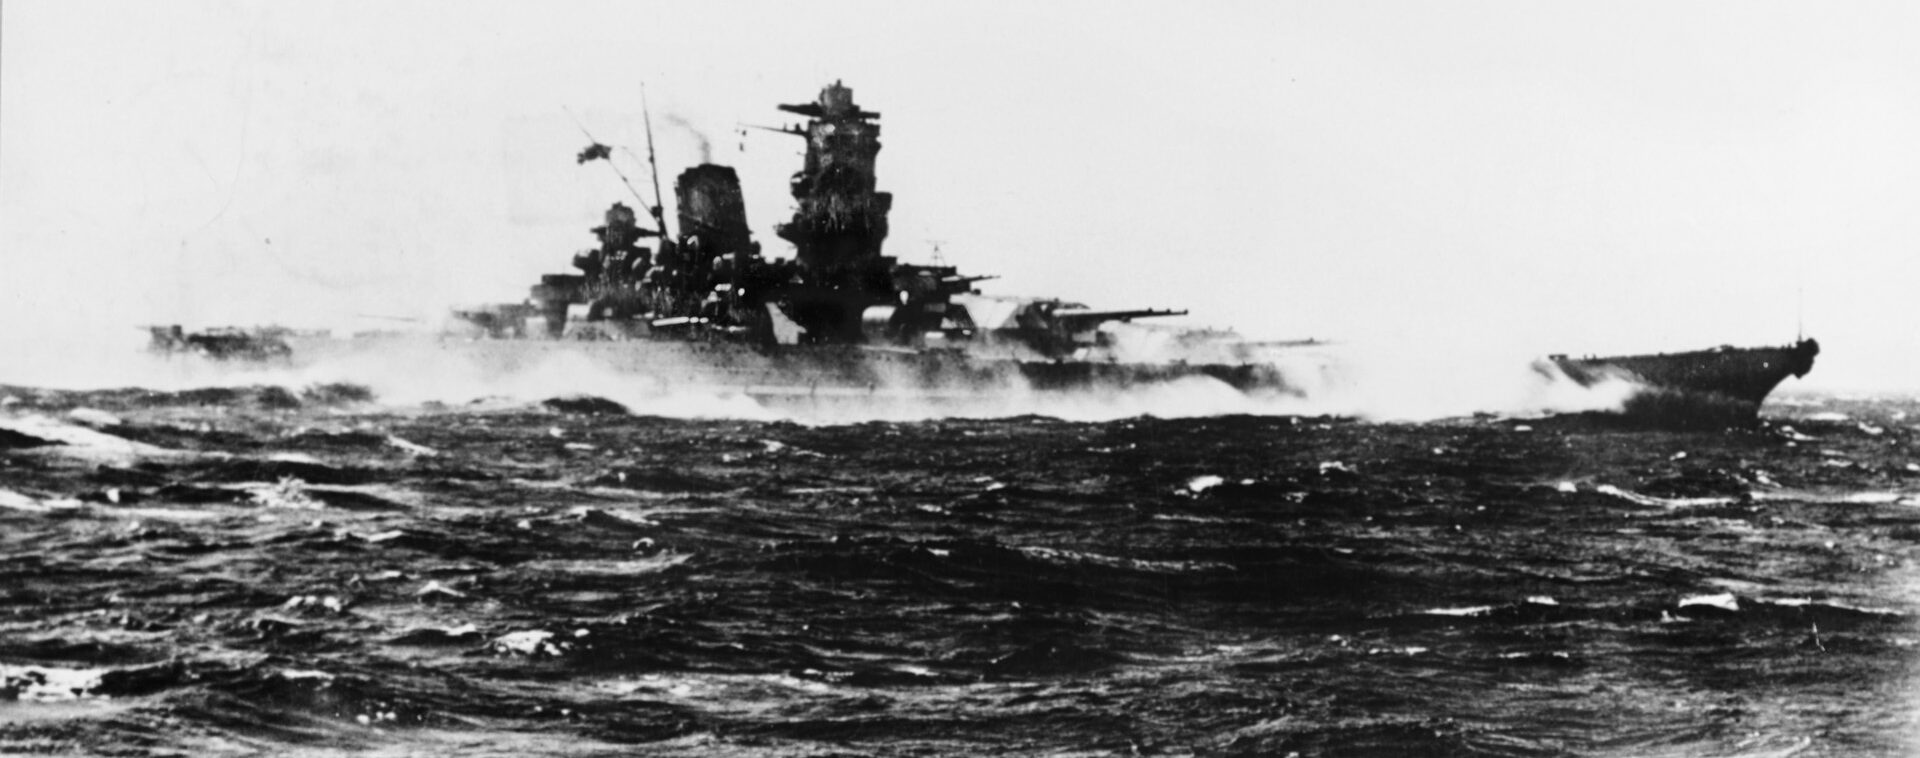 The Yamato engages in sea trials following its launch in December 1941. The Yamato and her sister ship, Musashi, had the distinction of being the heaviest and most powerfully armed battleships ever built.